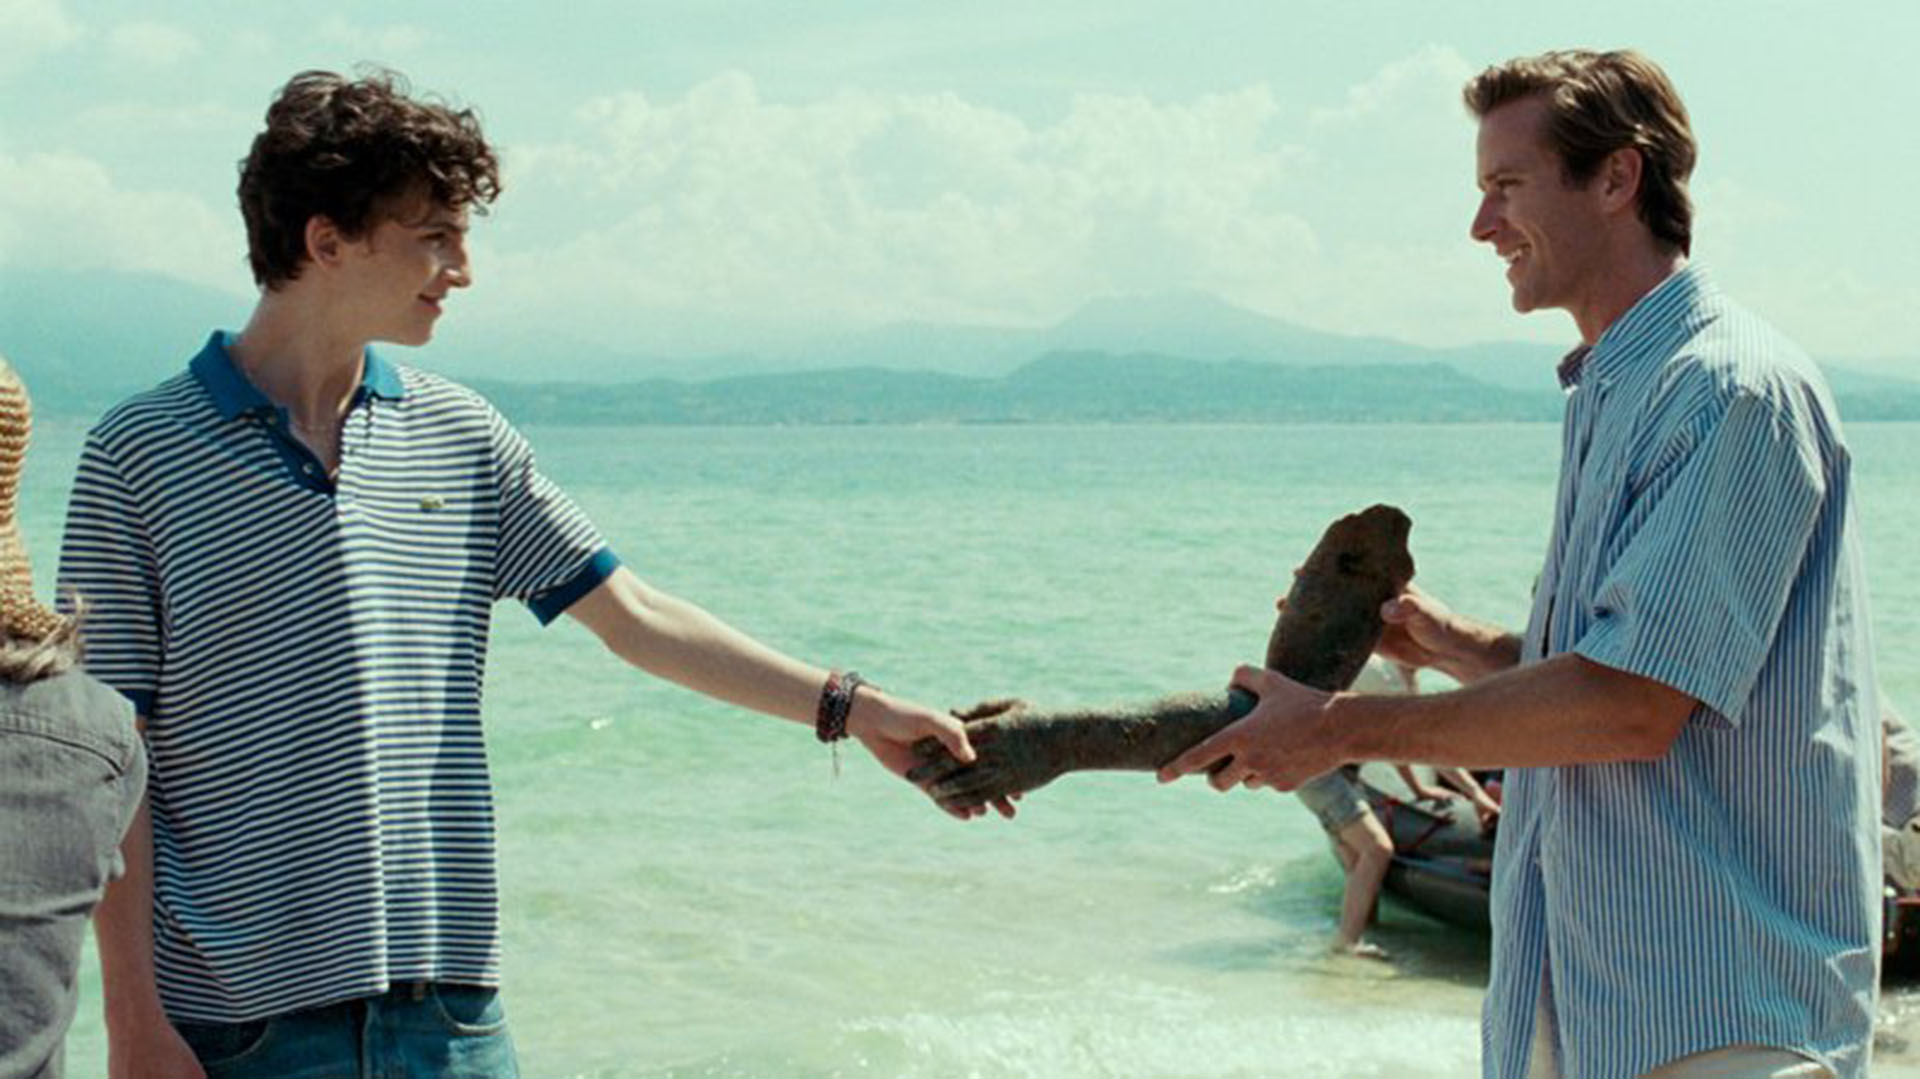 scene of "call me by your name"winner of the Oscar for Best Adapted Screenplay